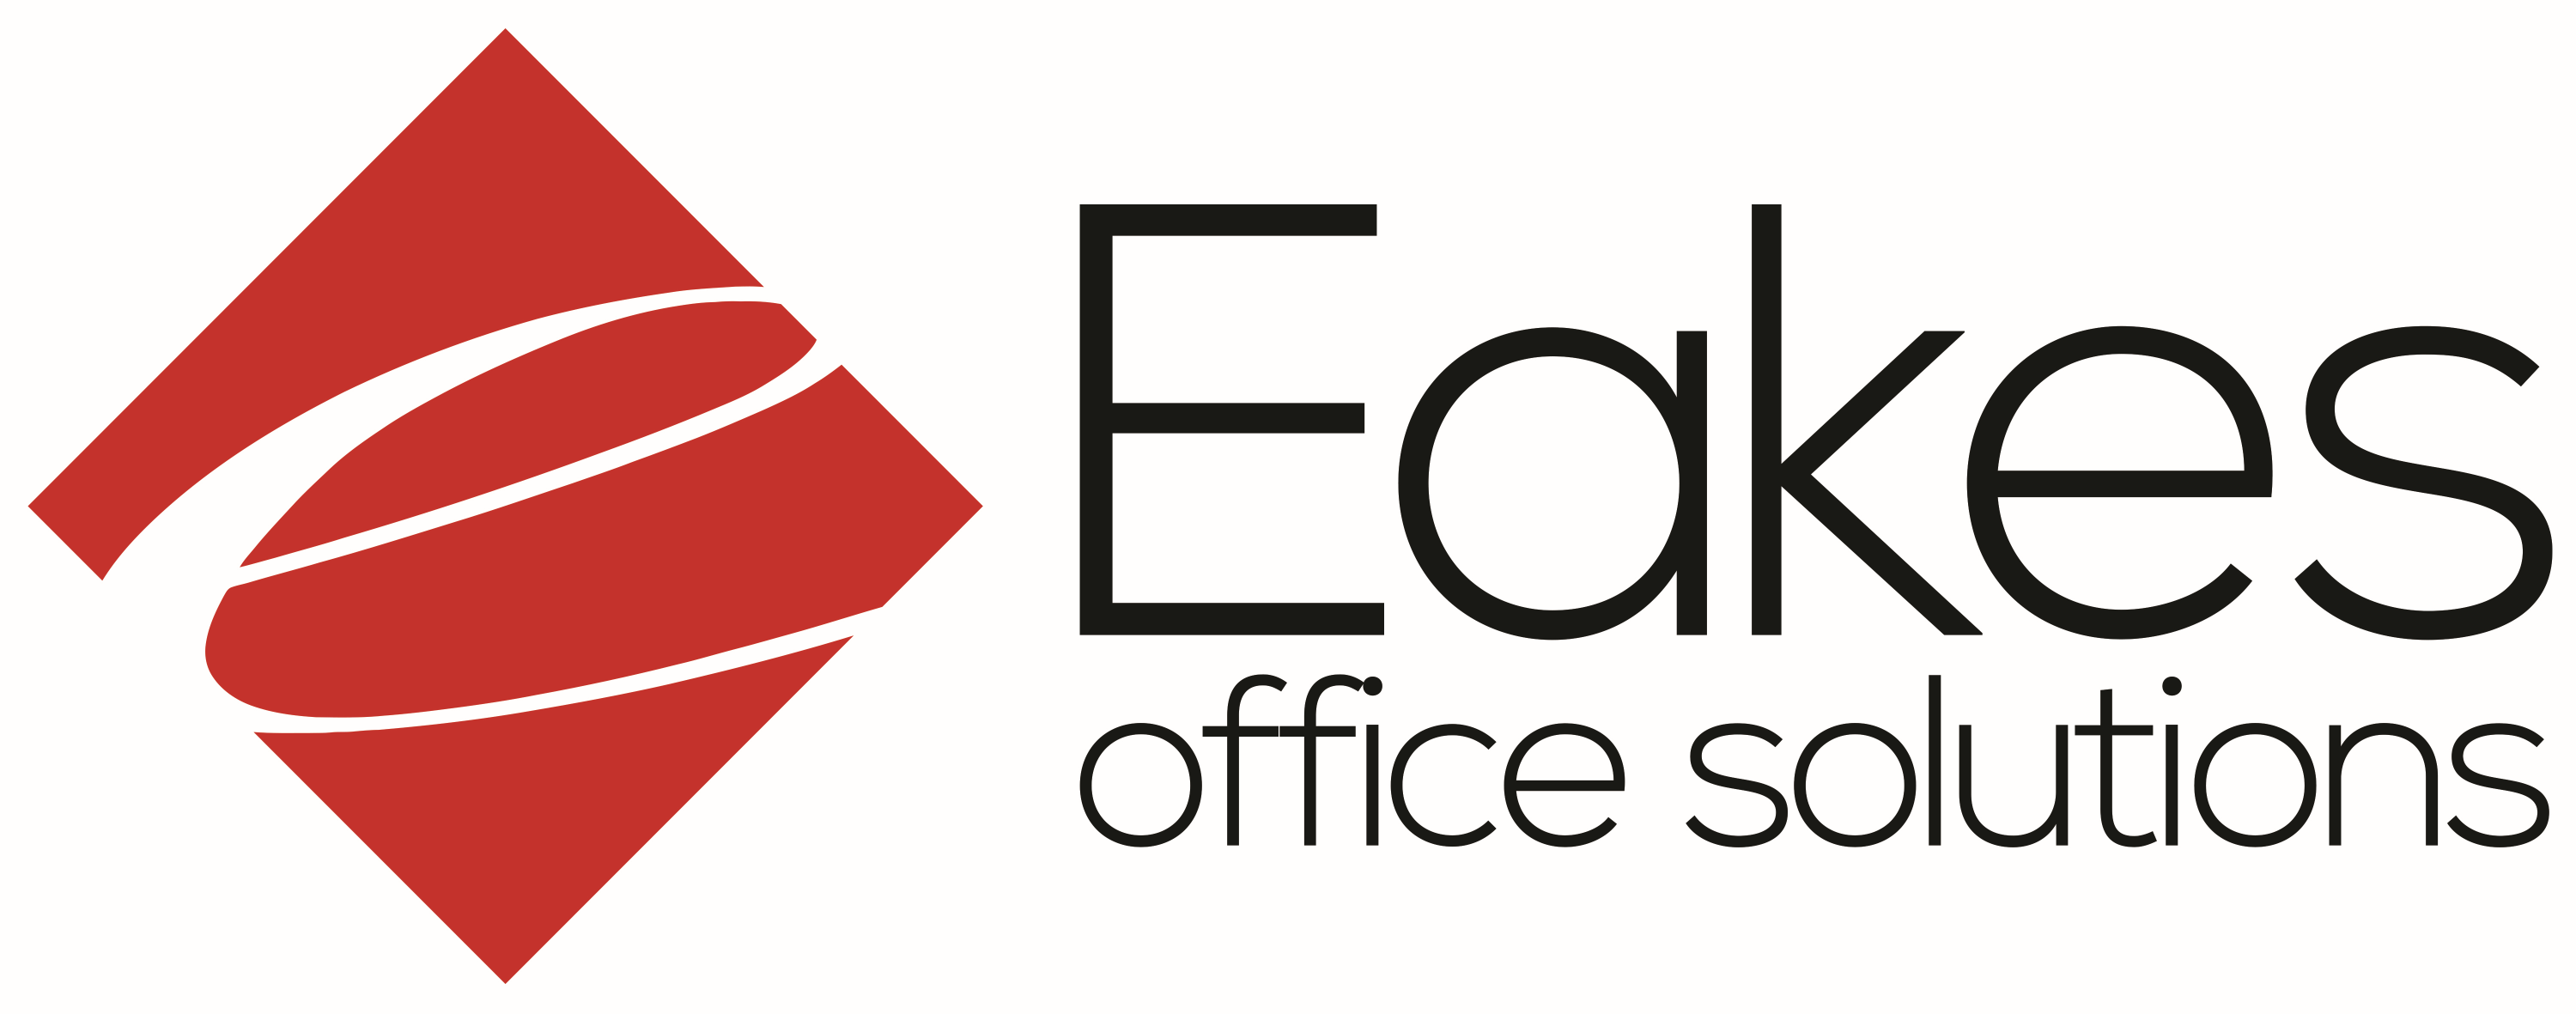 Eakes Office Solutions's Image